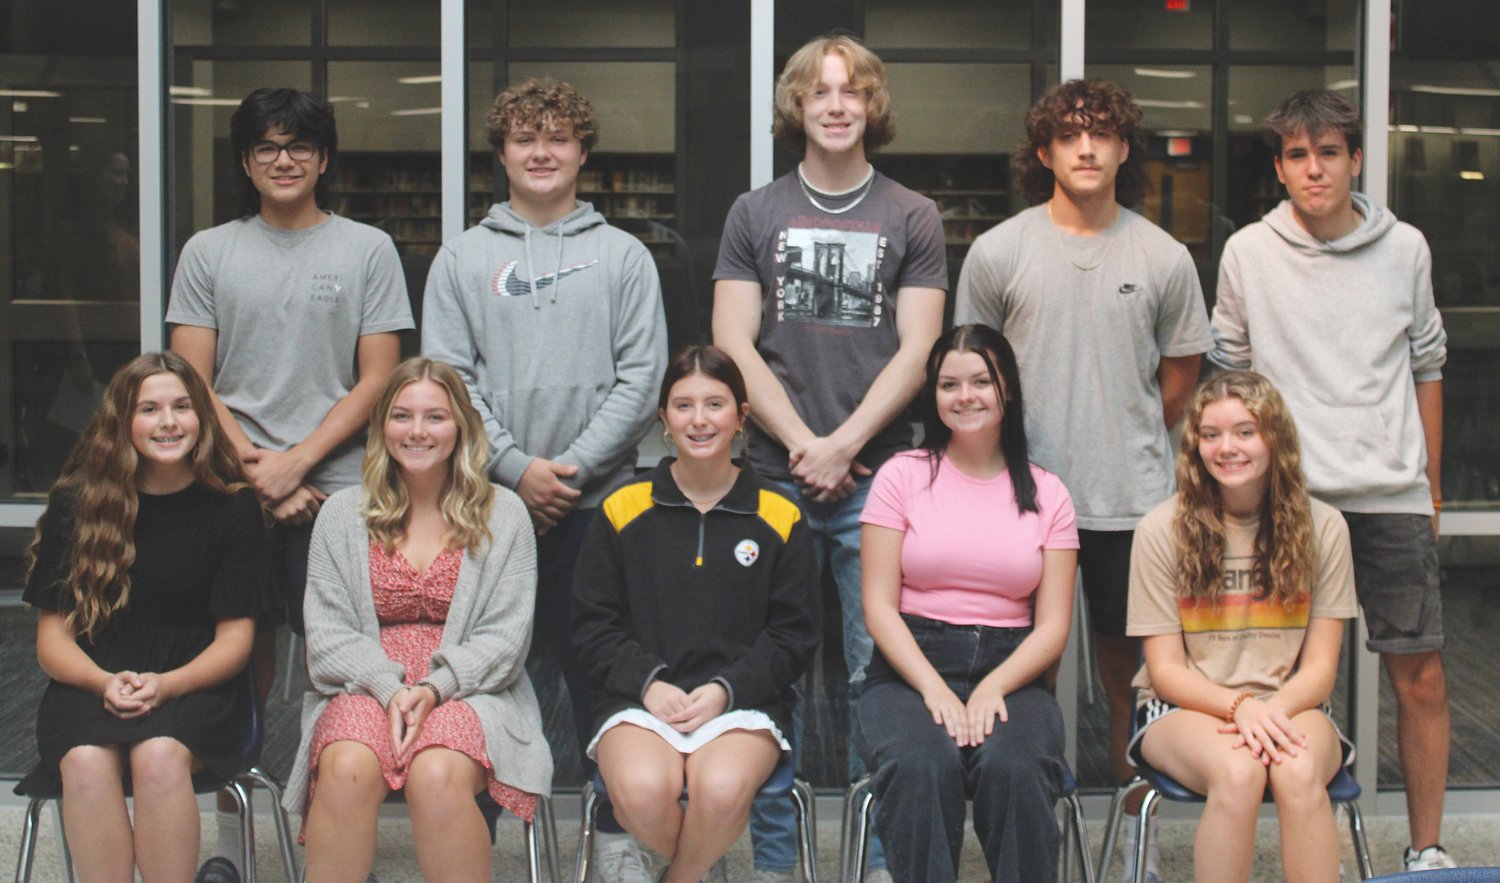 Members of the North Montgomery High School Fall Homecoming Court are, from left, front row, Macee Norman, Madison Vance, Kaidence Bullock, Macie Allen and Payton Bush; and back row, Dillon Punke, Austin Sulc, Nathan Hood, Josh Hubbard and Marc Infantes Mancebo. Not pictured is Lilli Northcutt and Kevin Toledano. The Homecoming game is at 7 p.m. today against Crawfordsville.